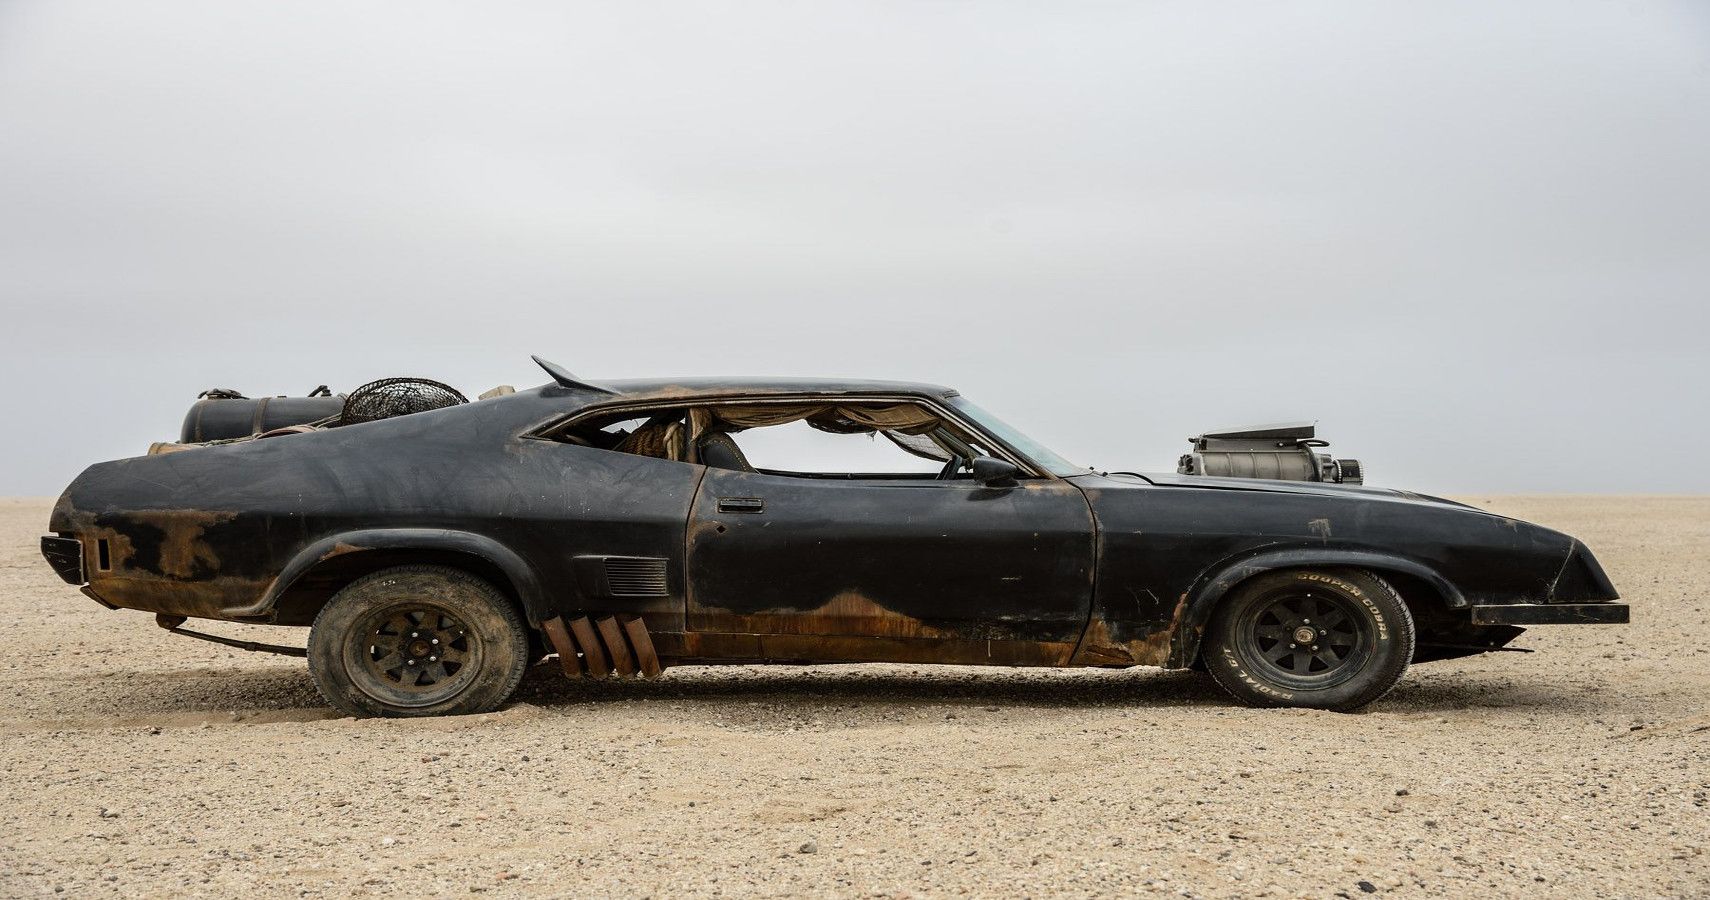 The original car was almost lost to history before being saved and restored.